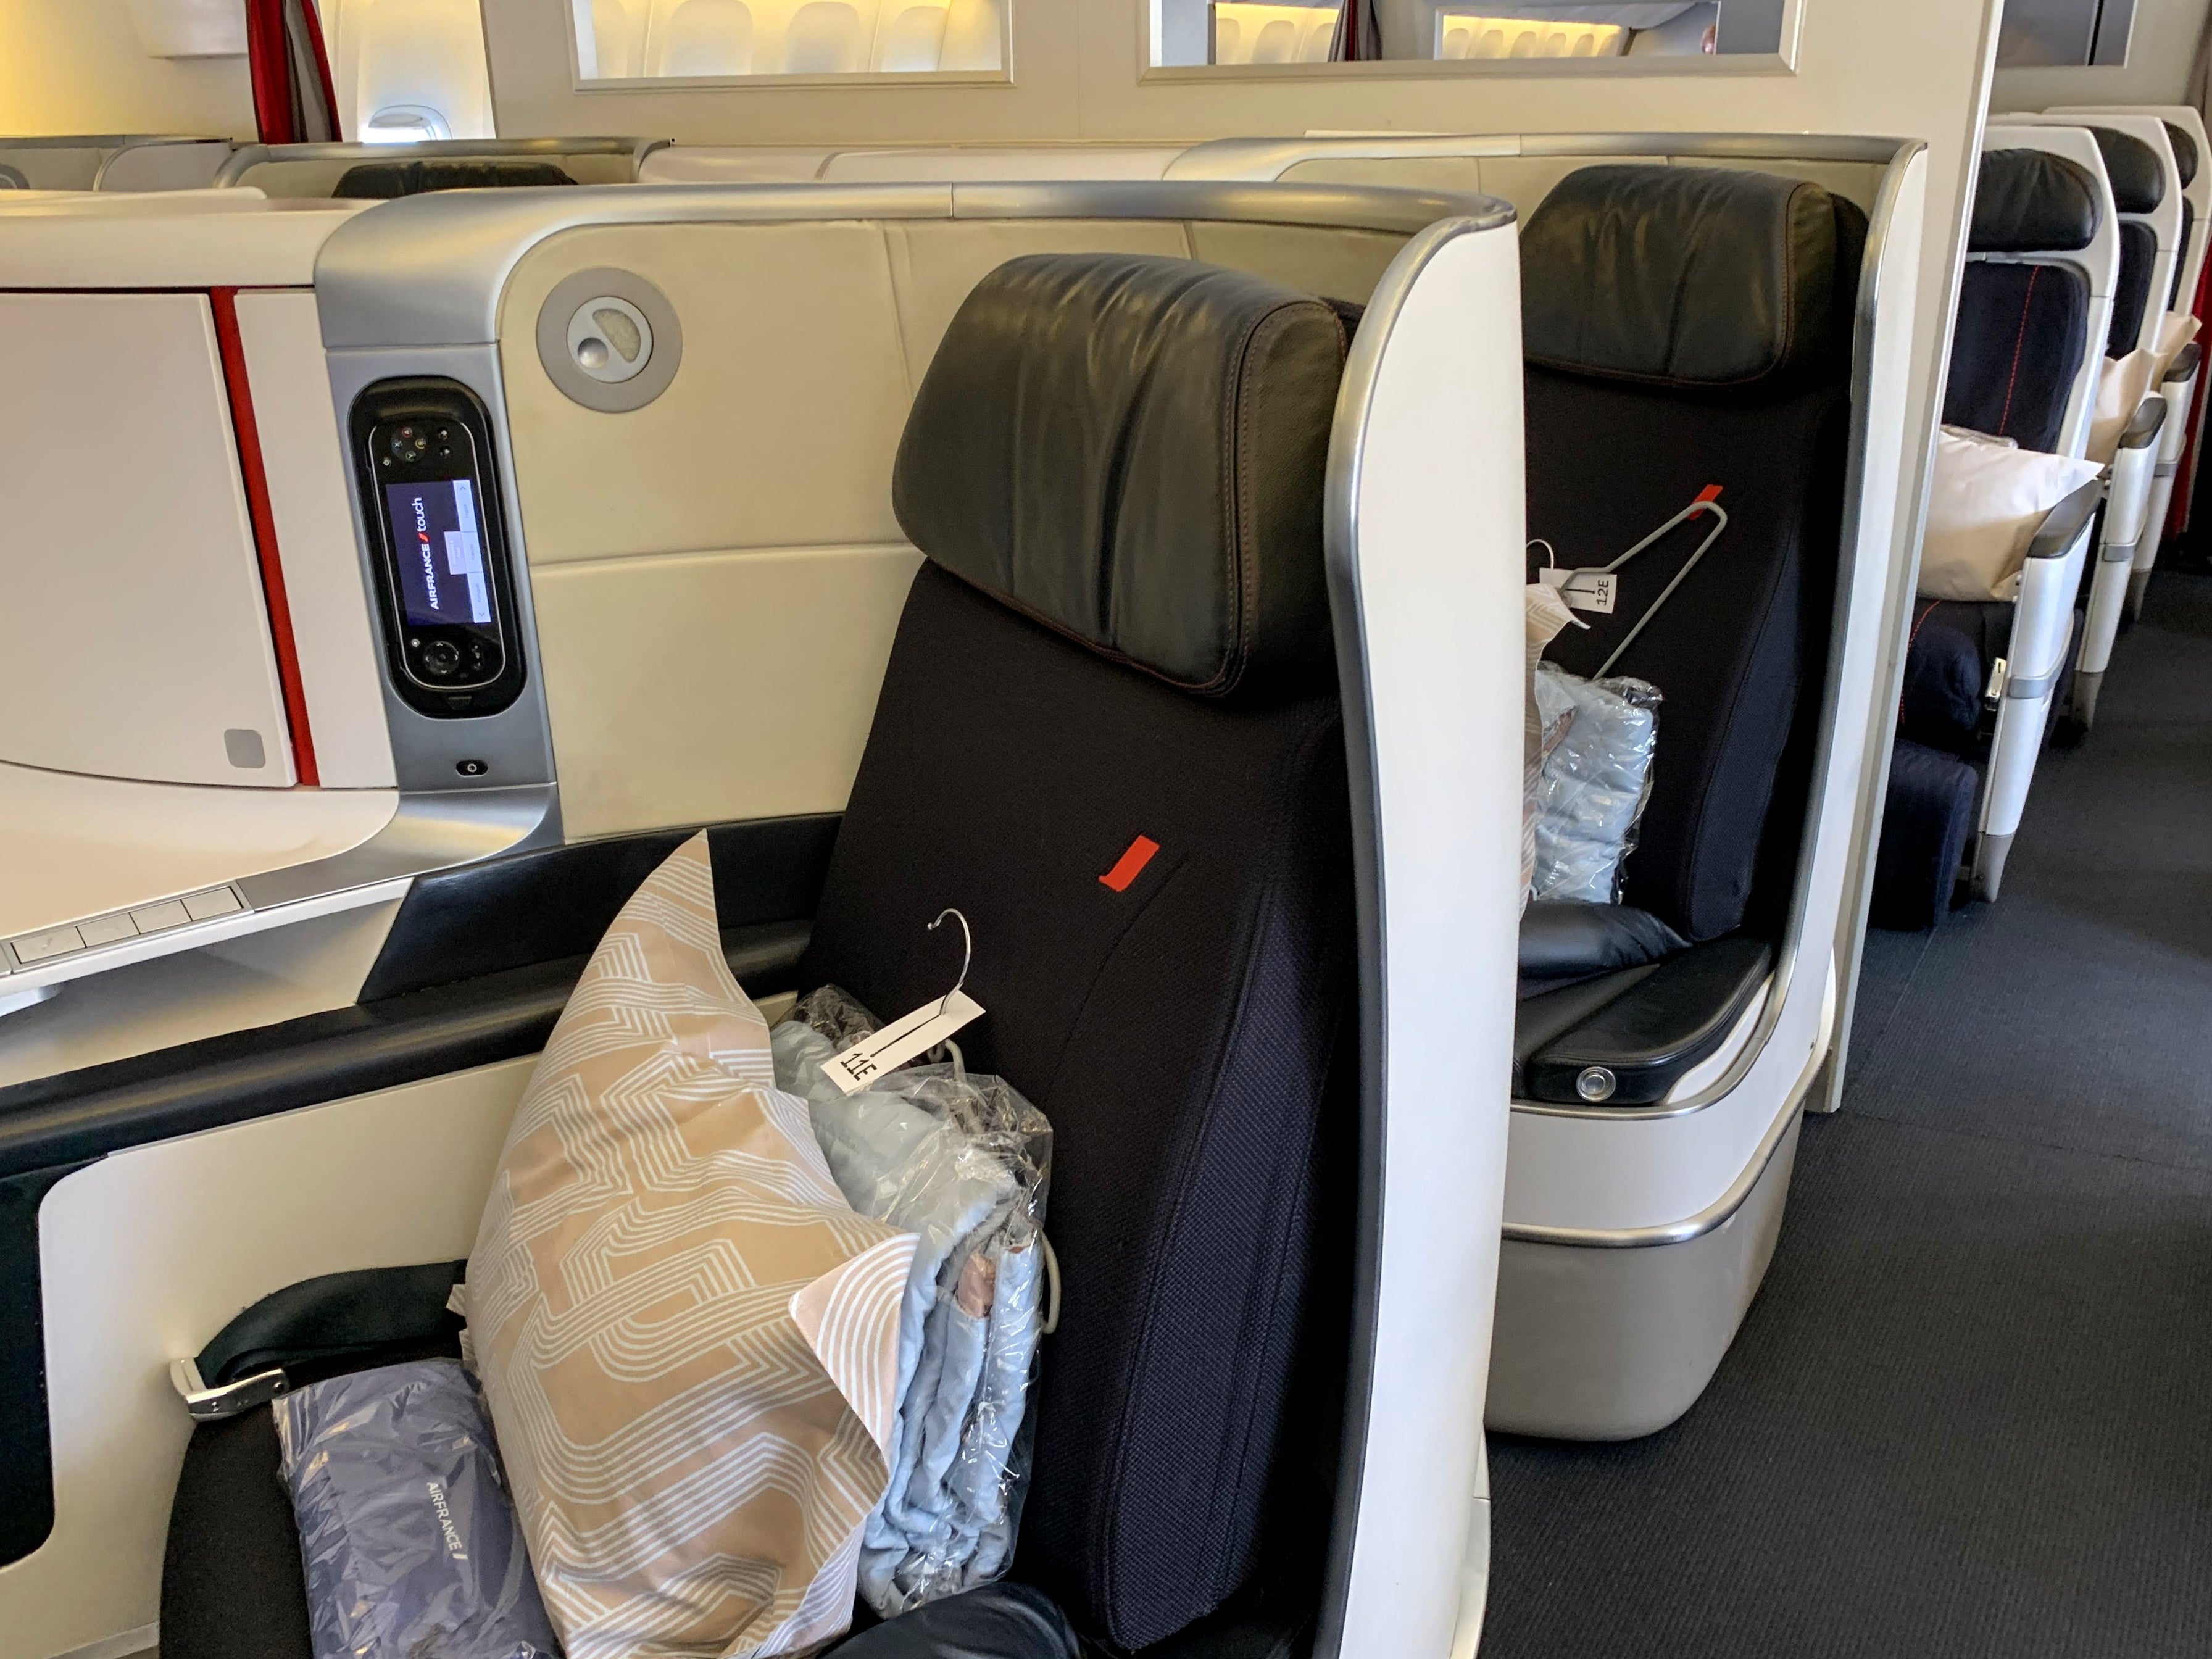 Air France Boeing 777 Business Class seating